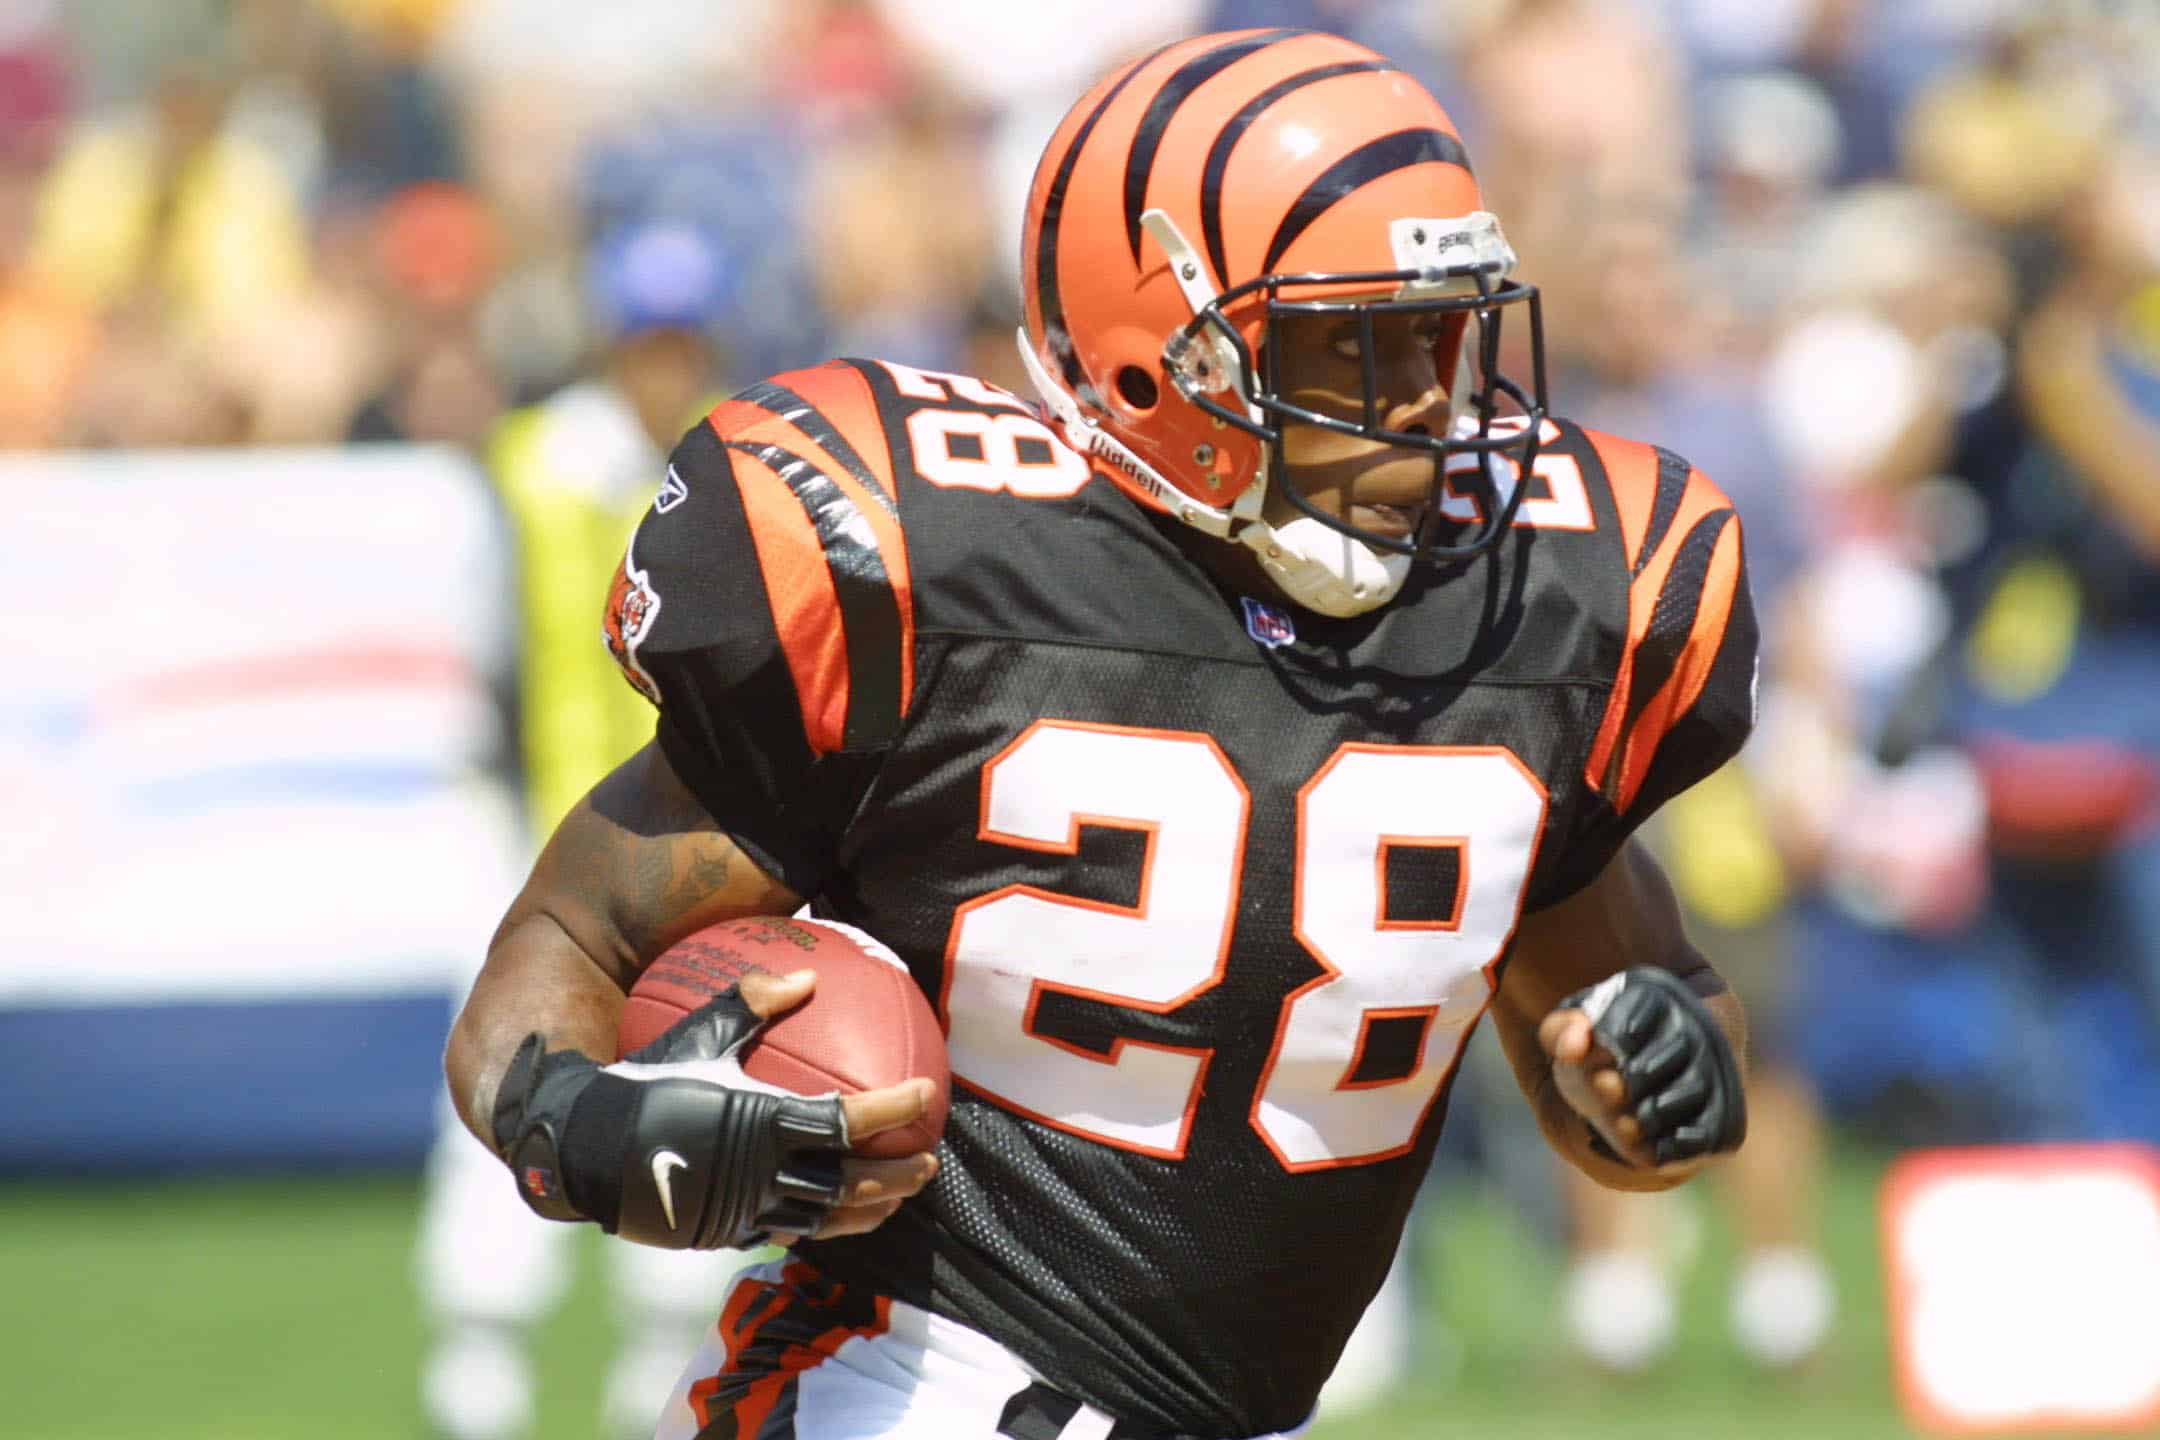 Corey Dillon #28 of the Bengals runs with the ball against the Chargers in their game at Qualcomm Stadium in San Diego, California. The Chargers won 28-14. DIGITAL IMAGE